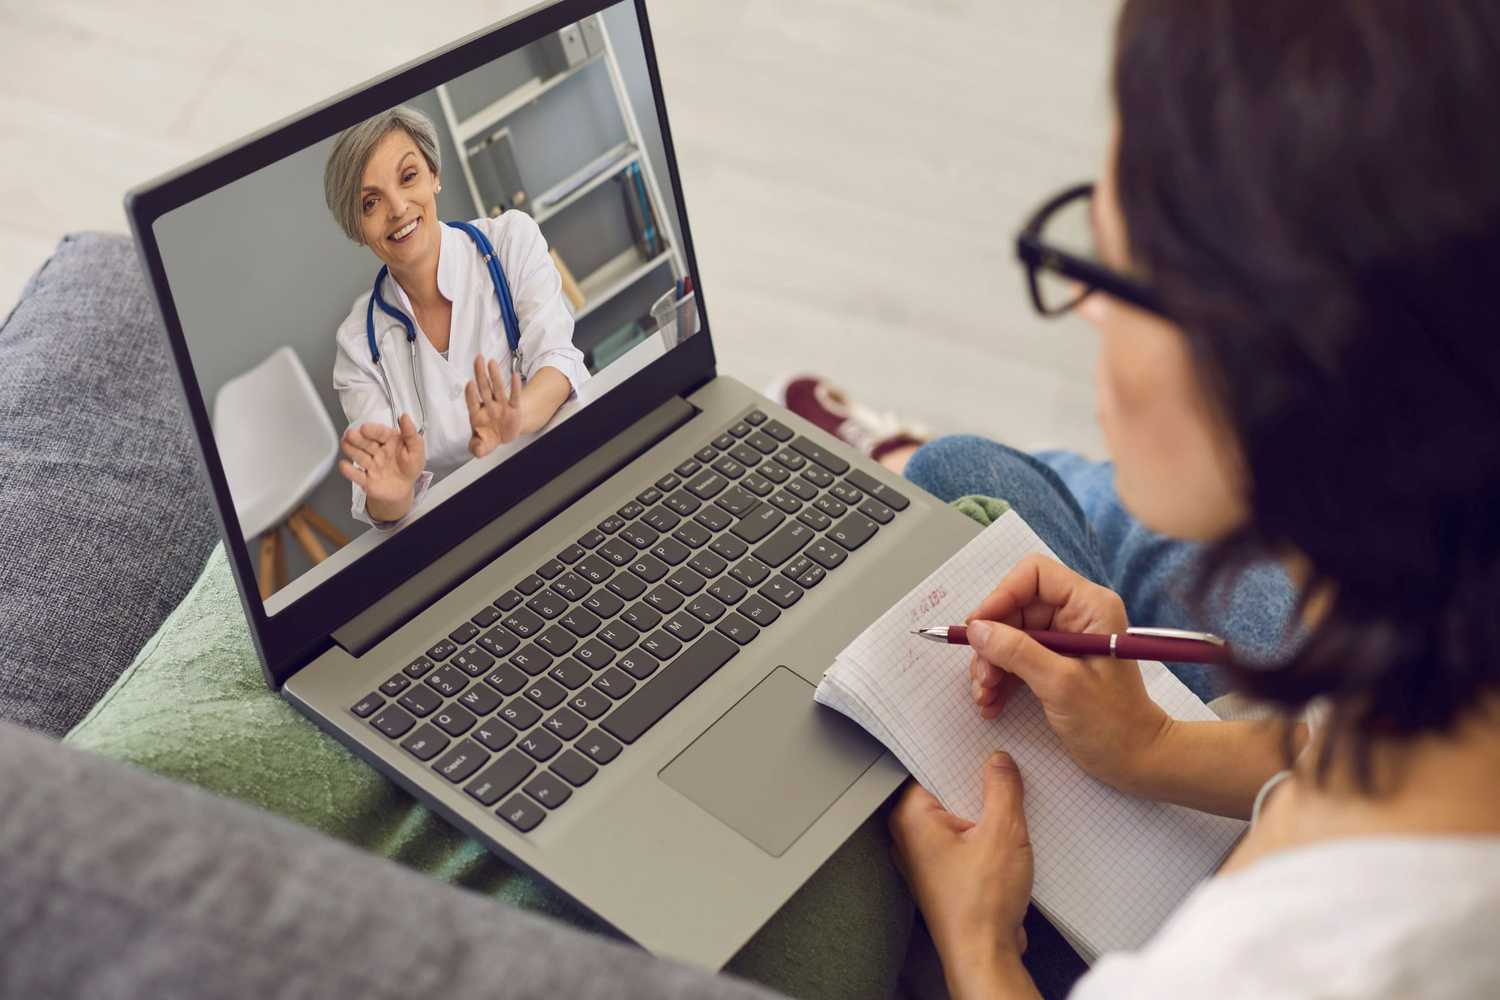 A female patient taking notes while on a telehealth visit with a doctor